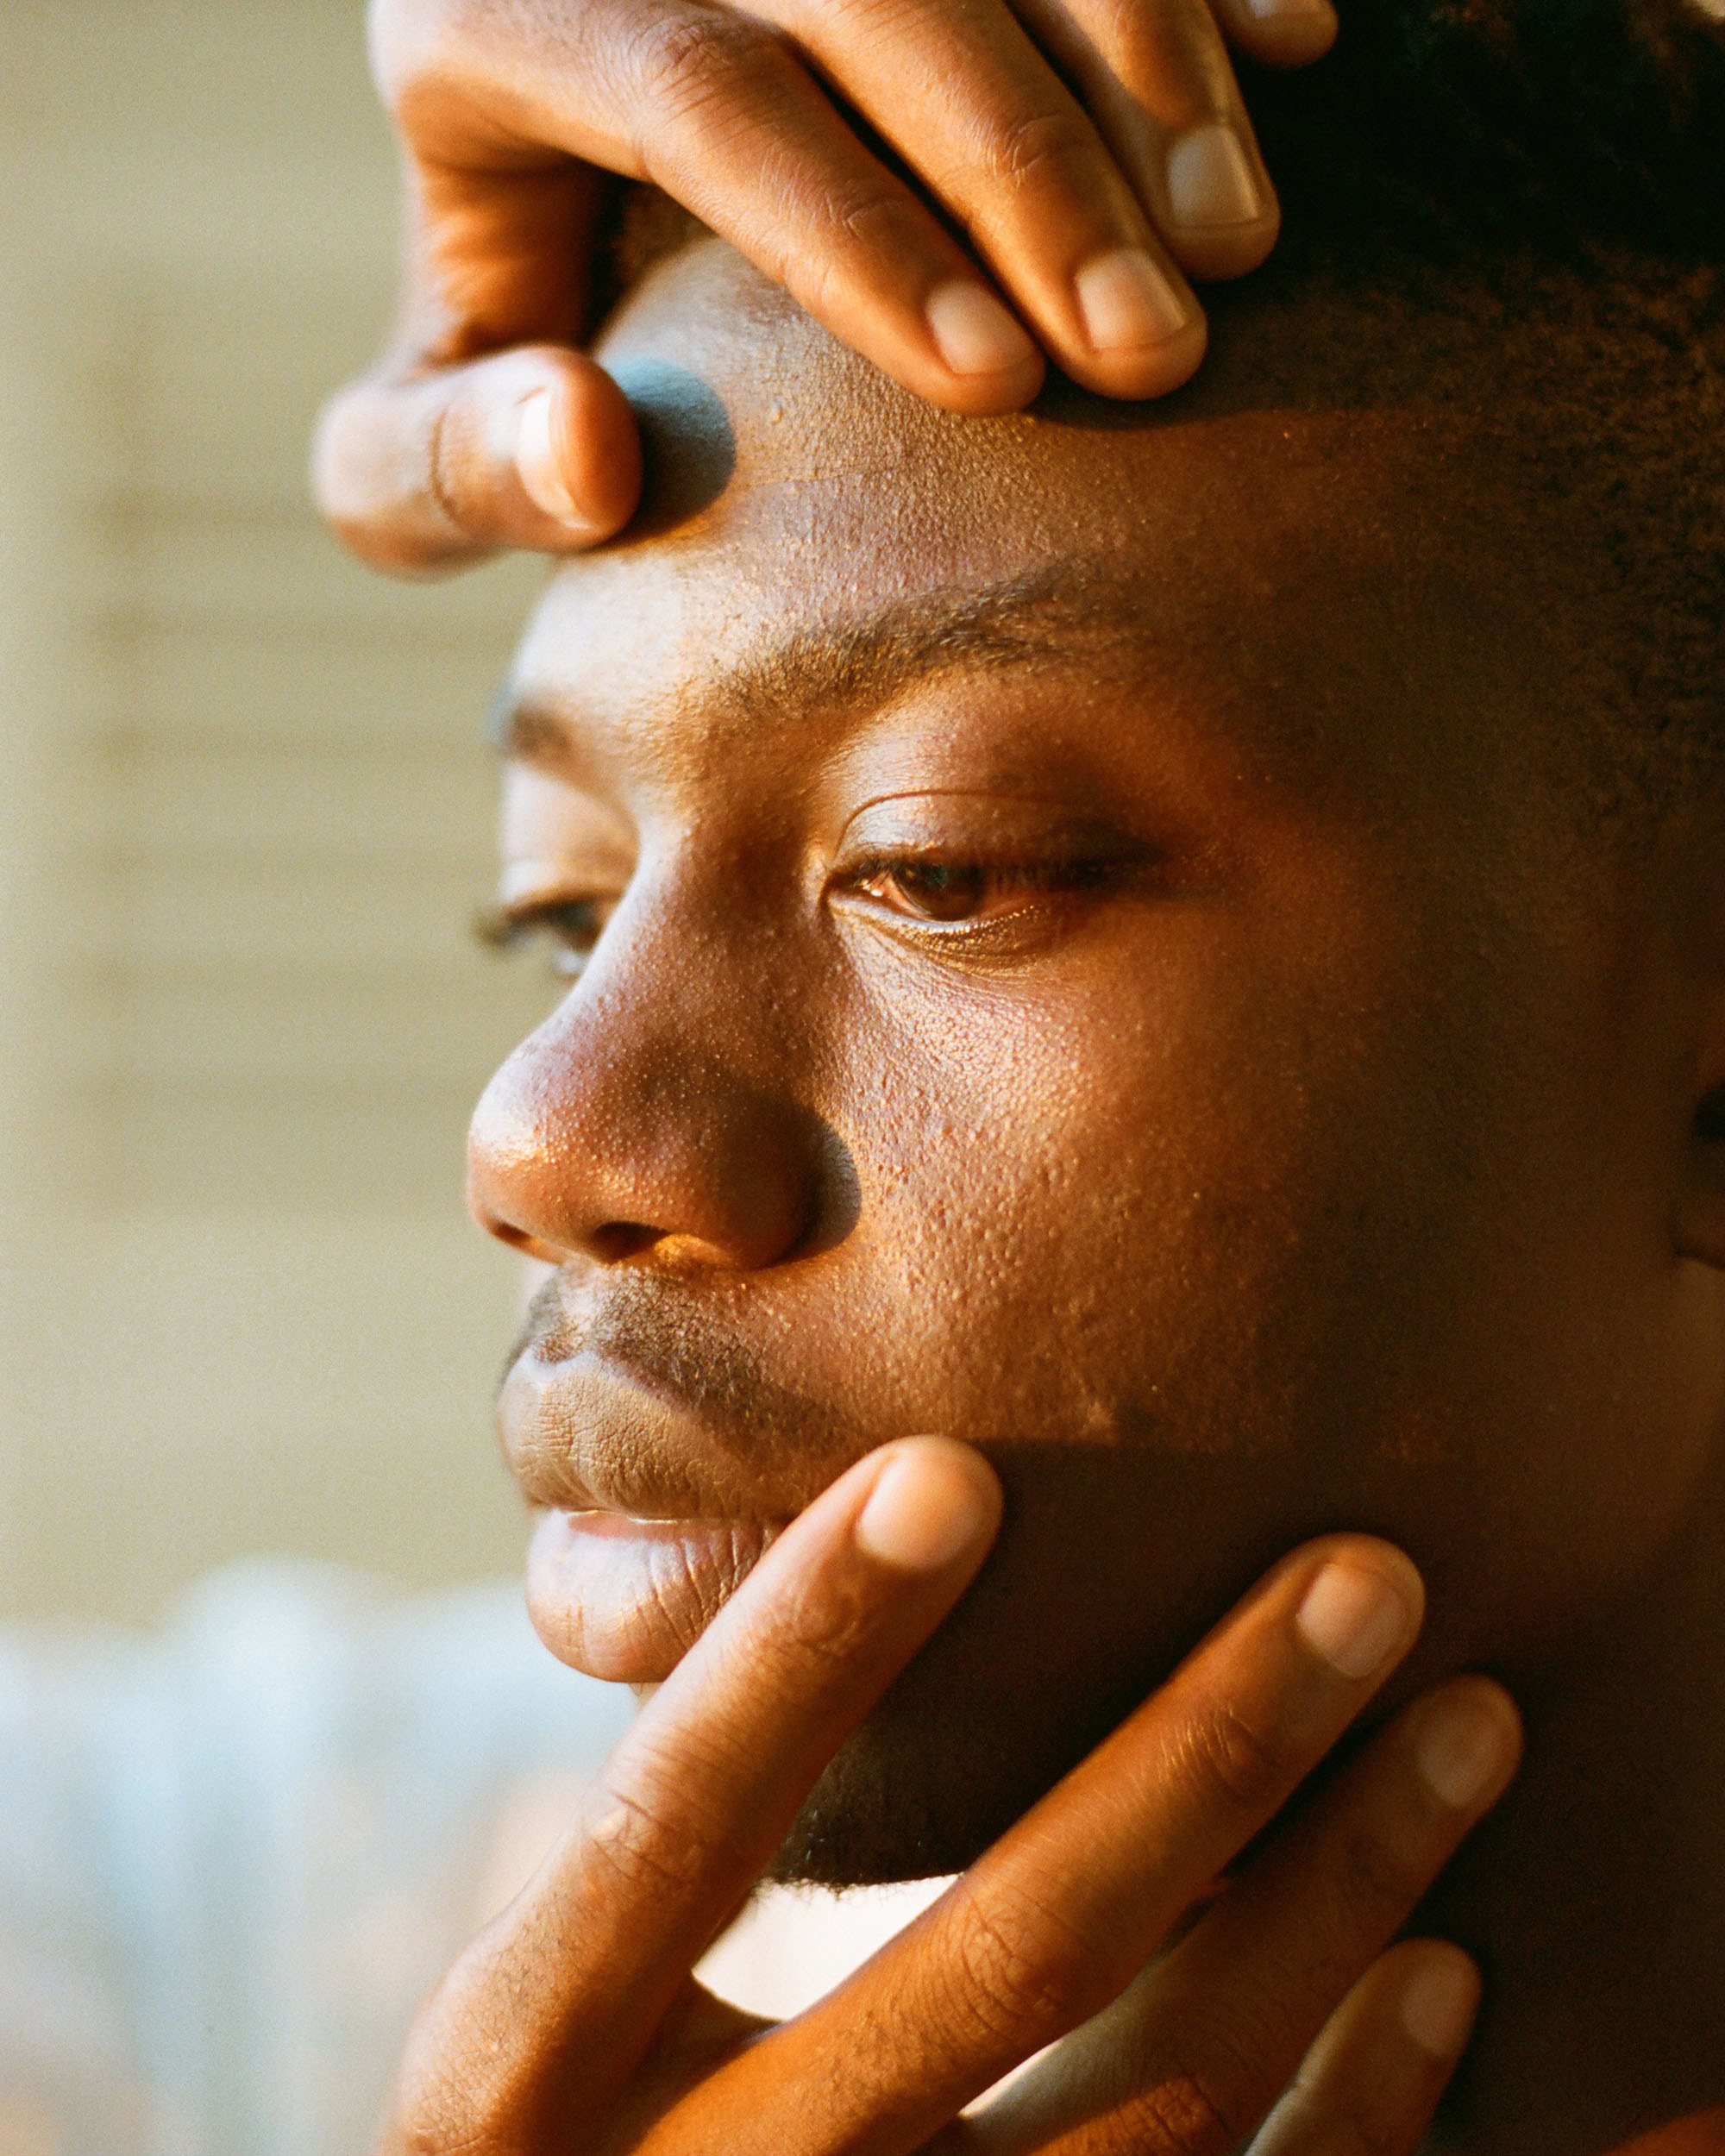 A young man looks away from the camera, hands cradle his face